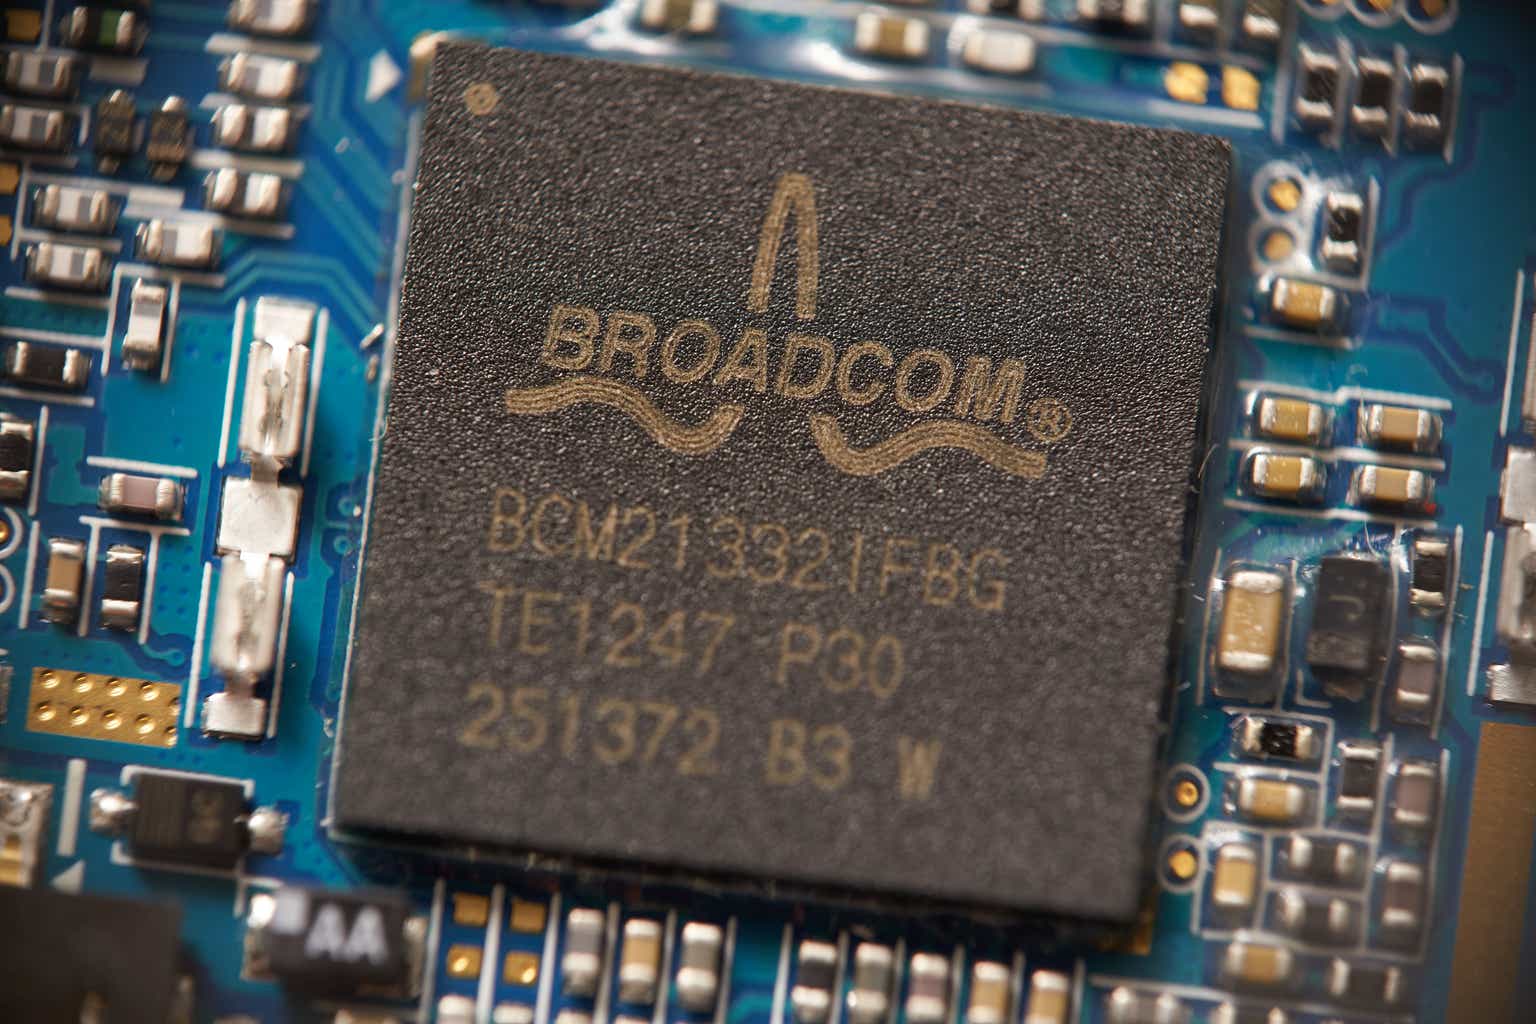 Broadcom Inventory: The Magnificence Inside – And VMware Will Add To It (NASDAQ:AVGO)